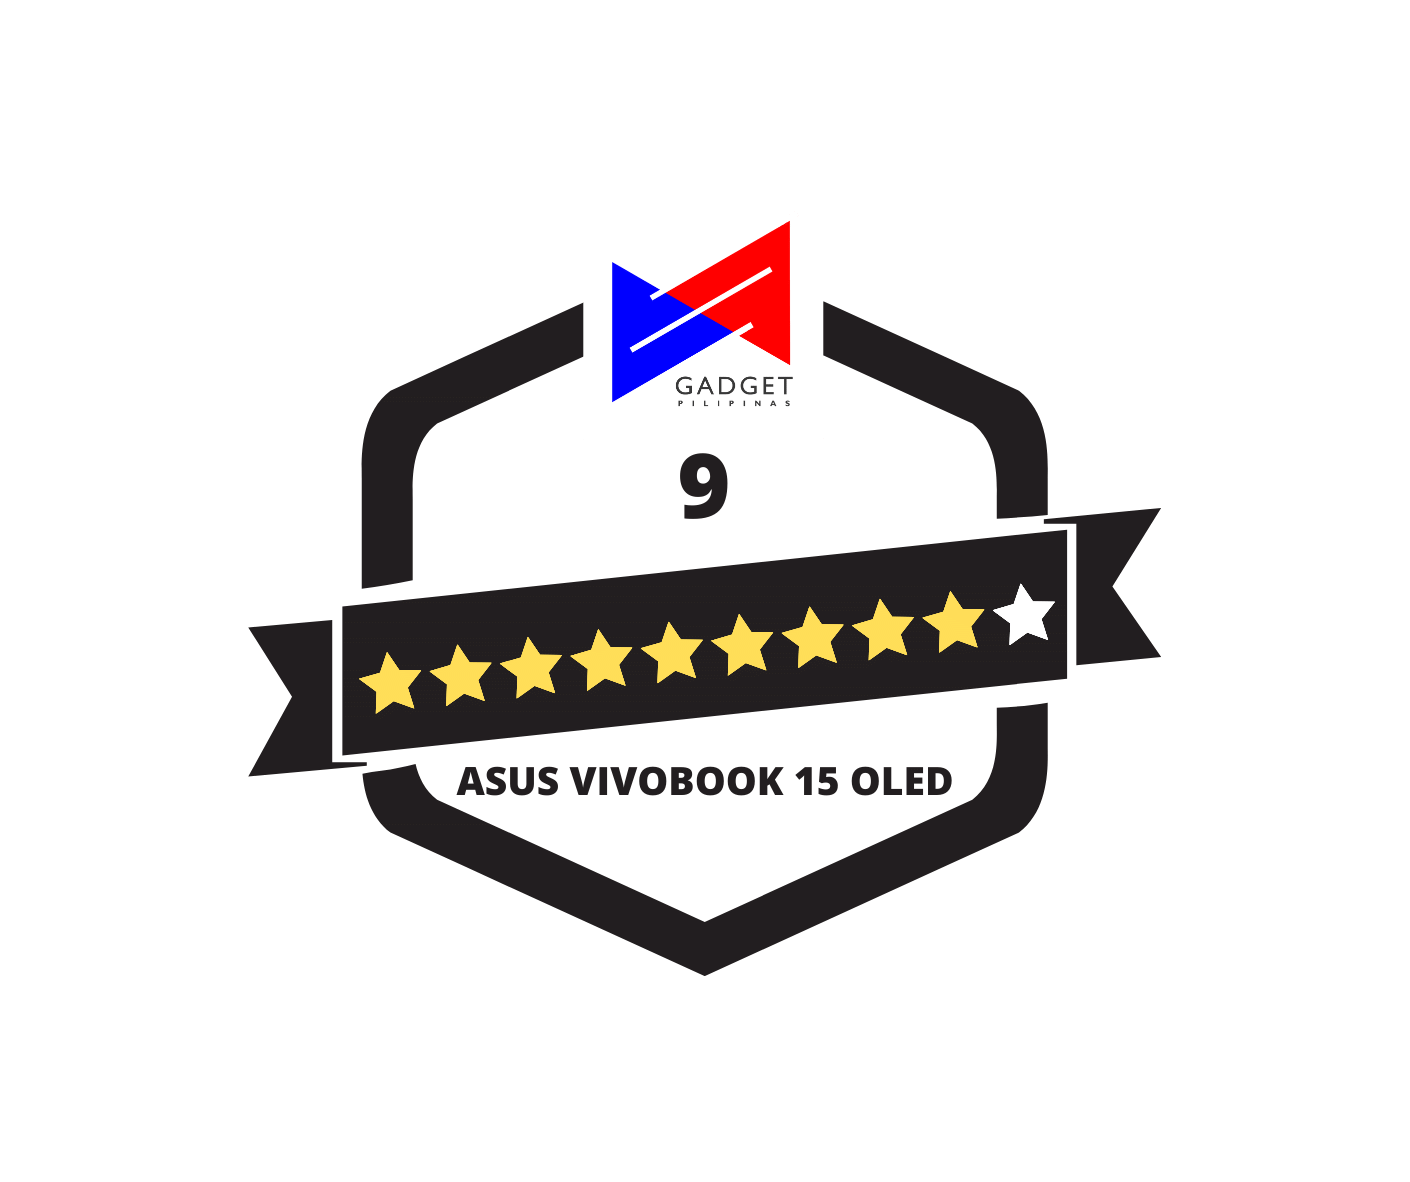 ASUS VivoBook 15 OLED Review PH Price - ASUS Vivobook 15 OLED Review Philippines